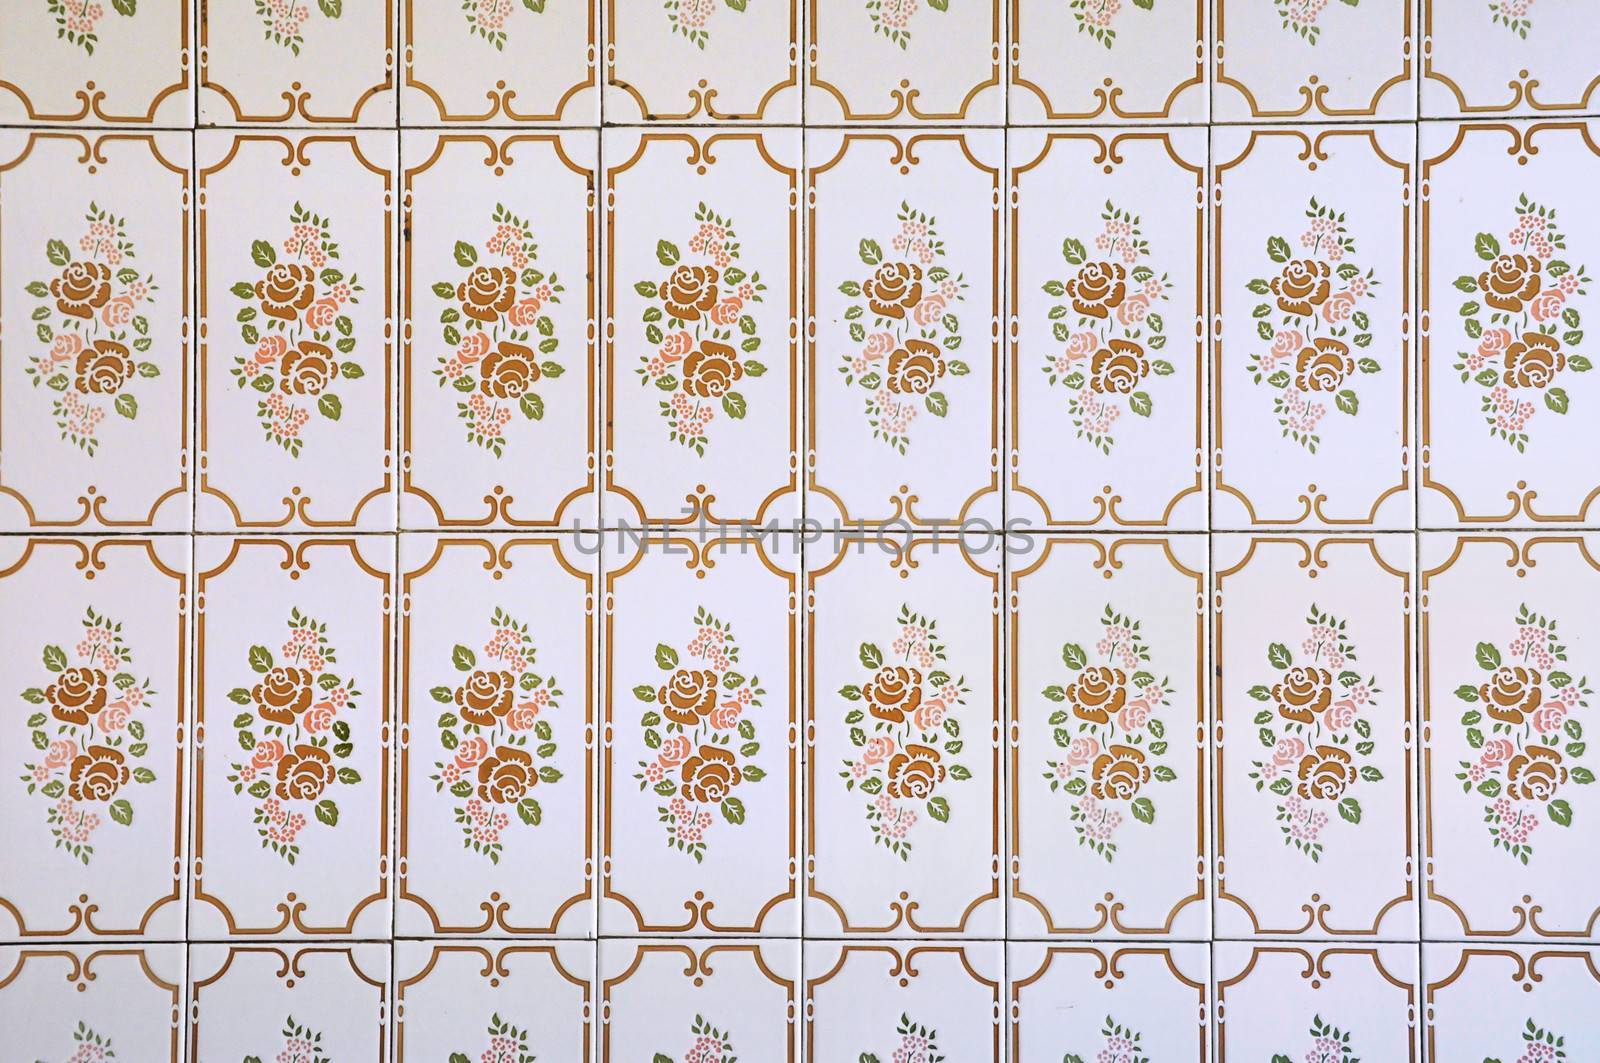 Kitchen wall tiles with floral pattern in a house built in 1970's. Vintage background.